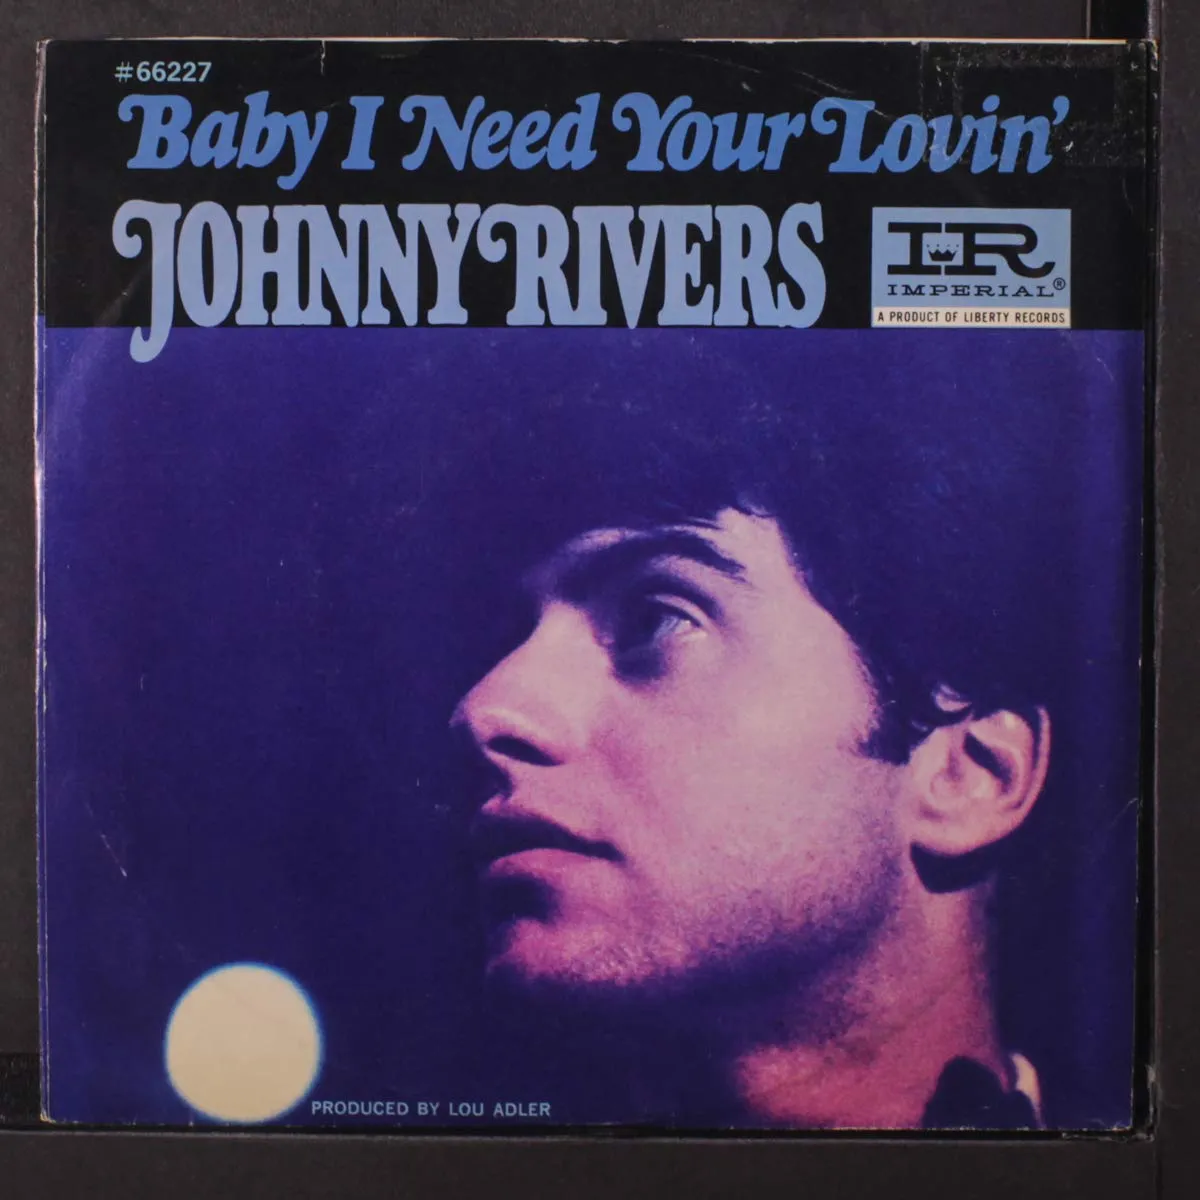 Johnny Rivers "Baby I Need Your Lovin'" Cover